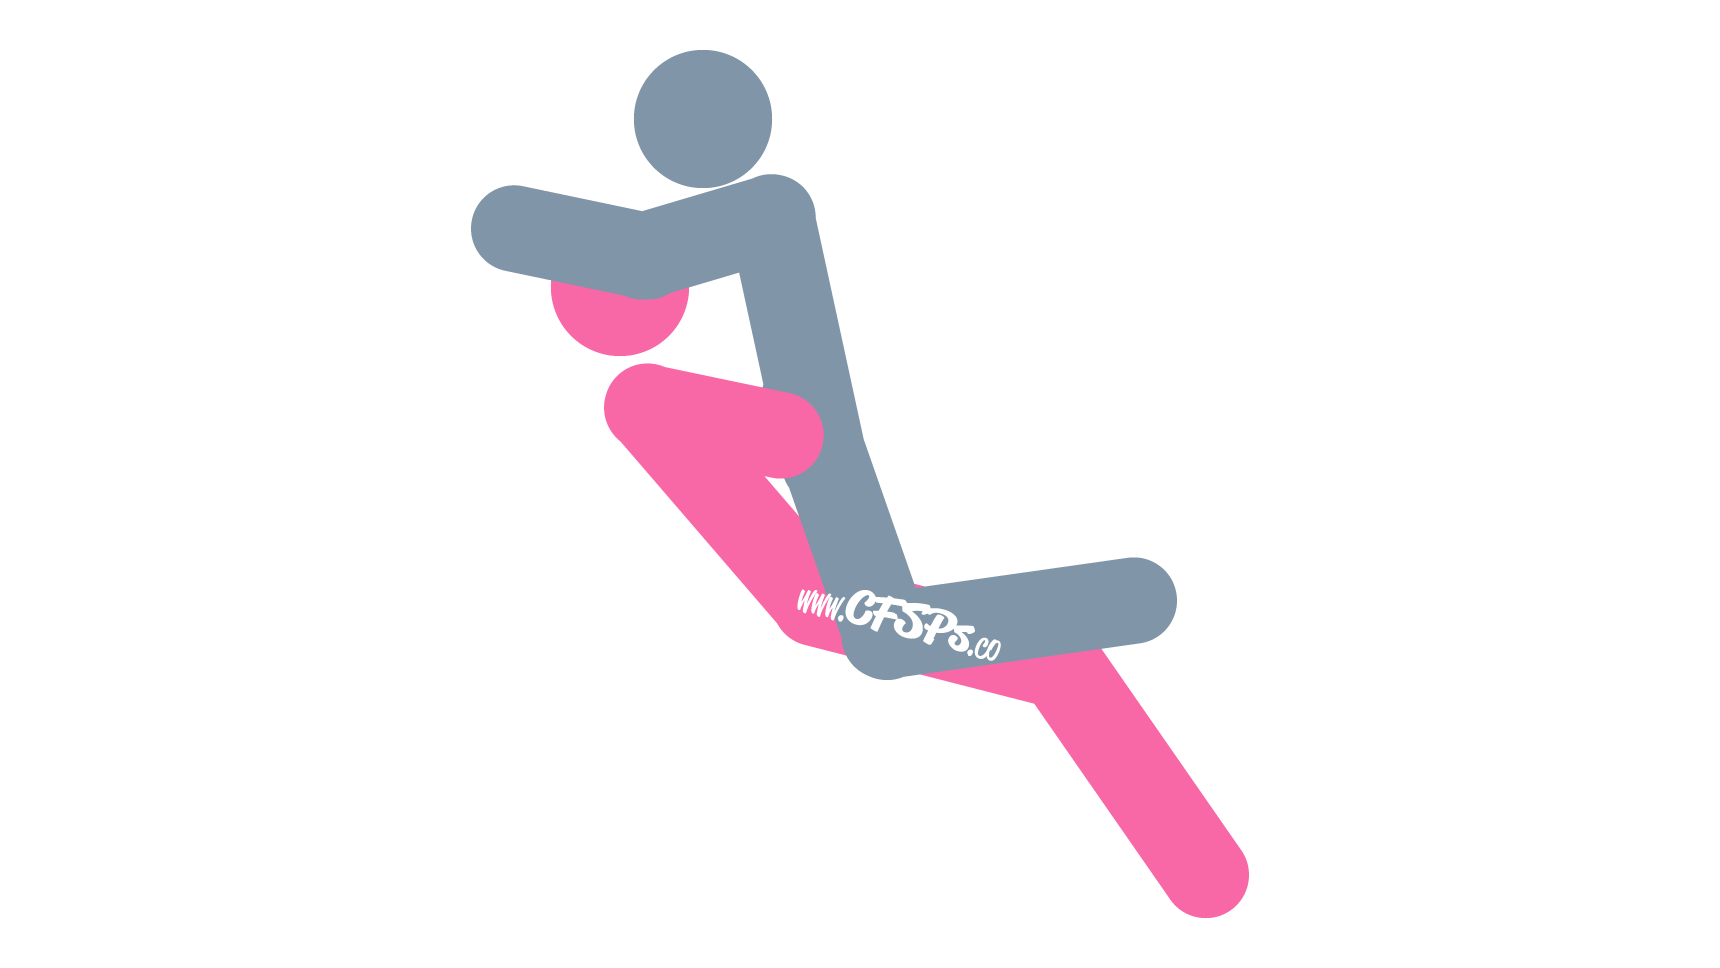 This stick figure image depicts a man and woman engaging in breast sex in the Happy Valley boob sex position. The woman is sitting in a recliner or sofa. The man is straddling her with his knees on the seat cushion on each side of her, leaning forward and supporting his upper body with his hands on the backrest.